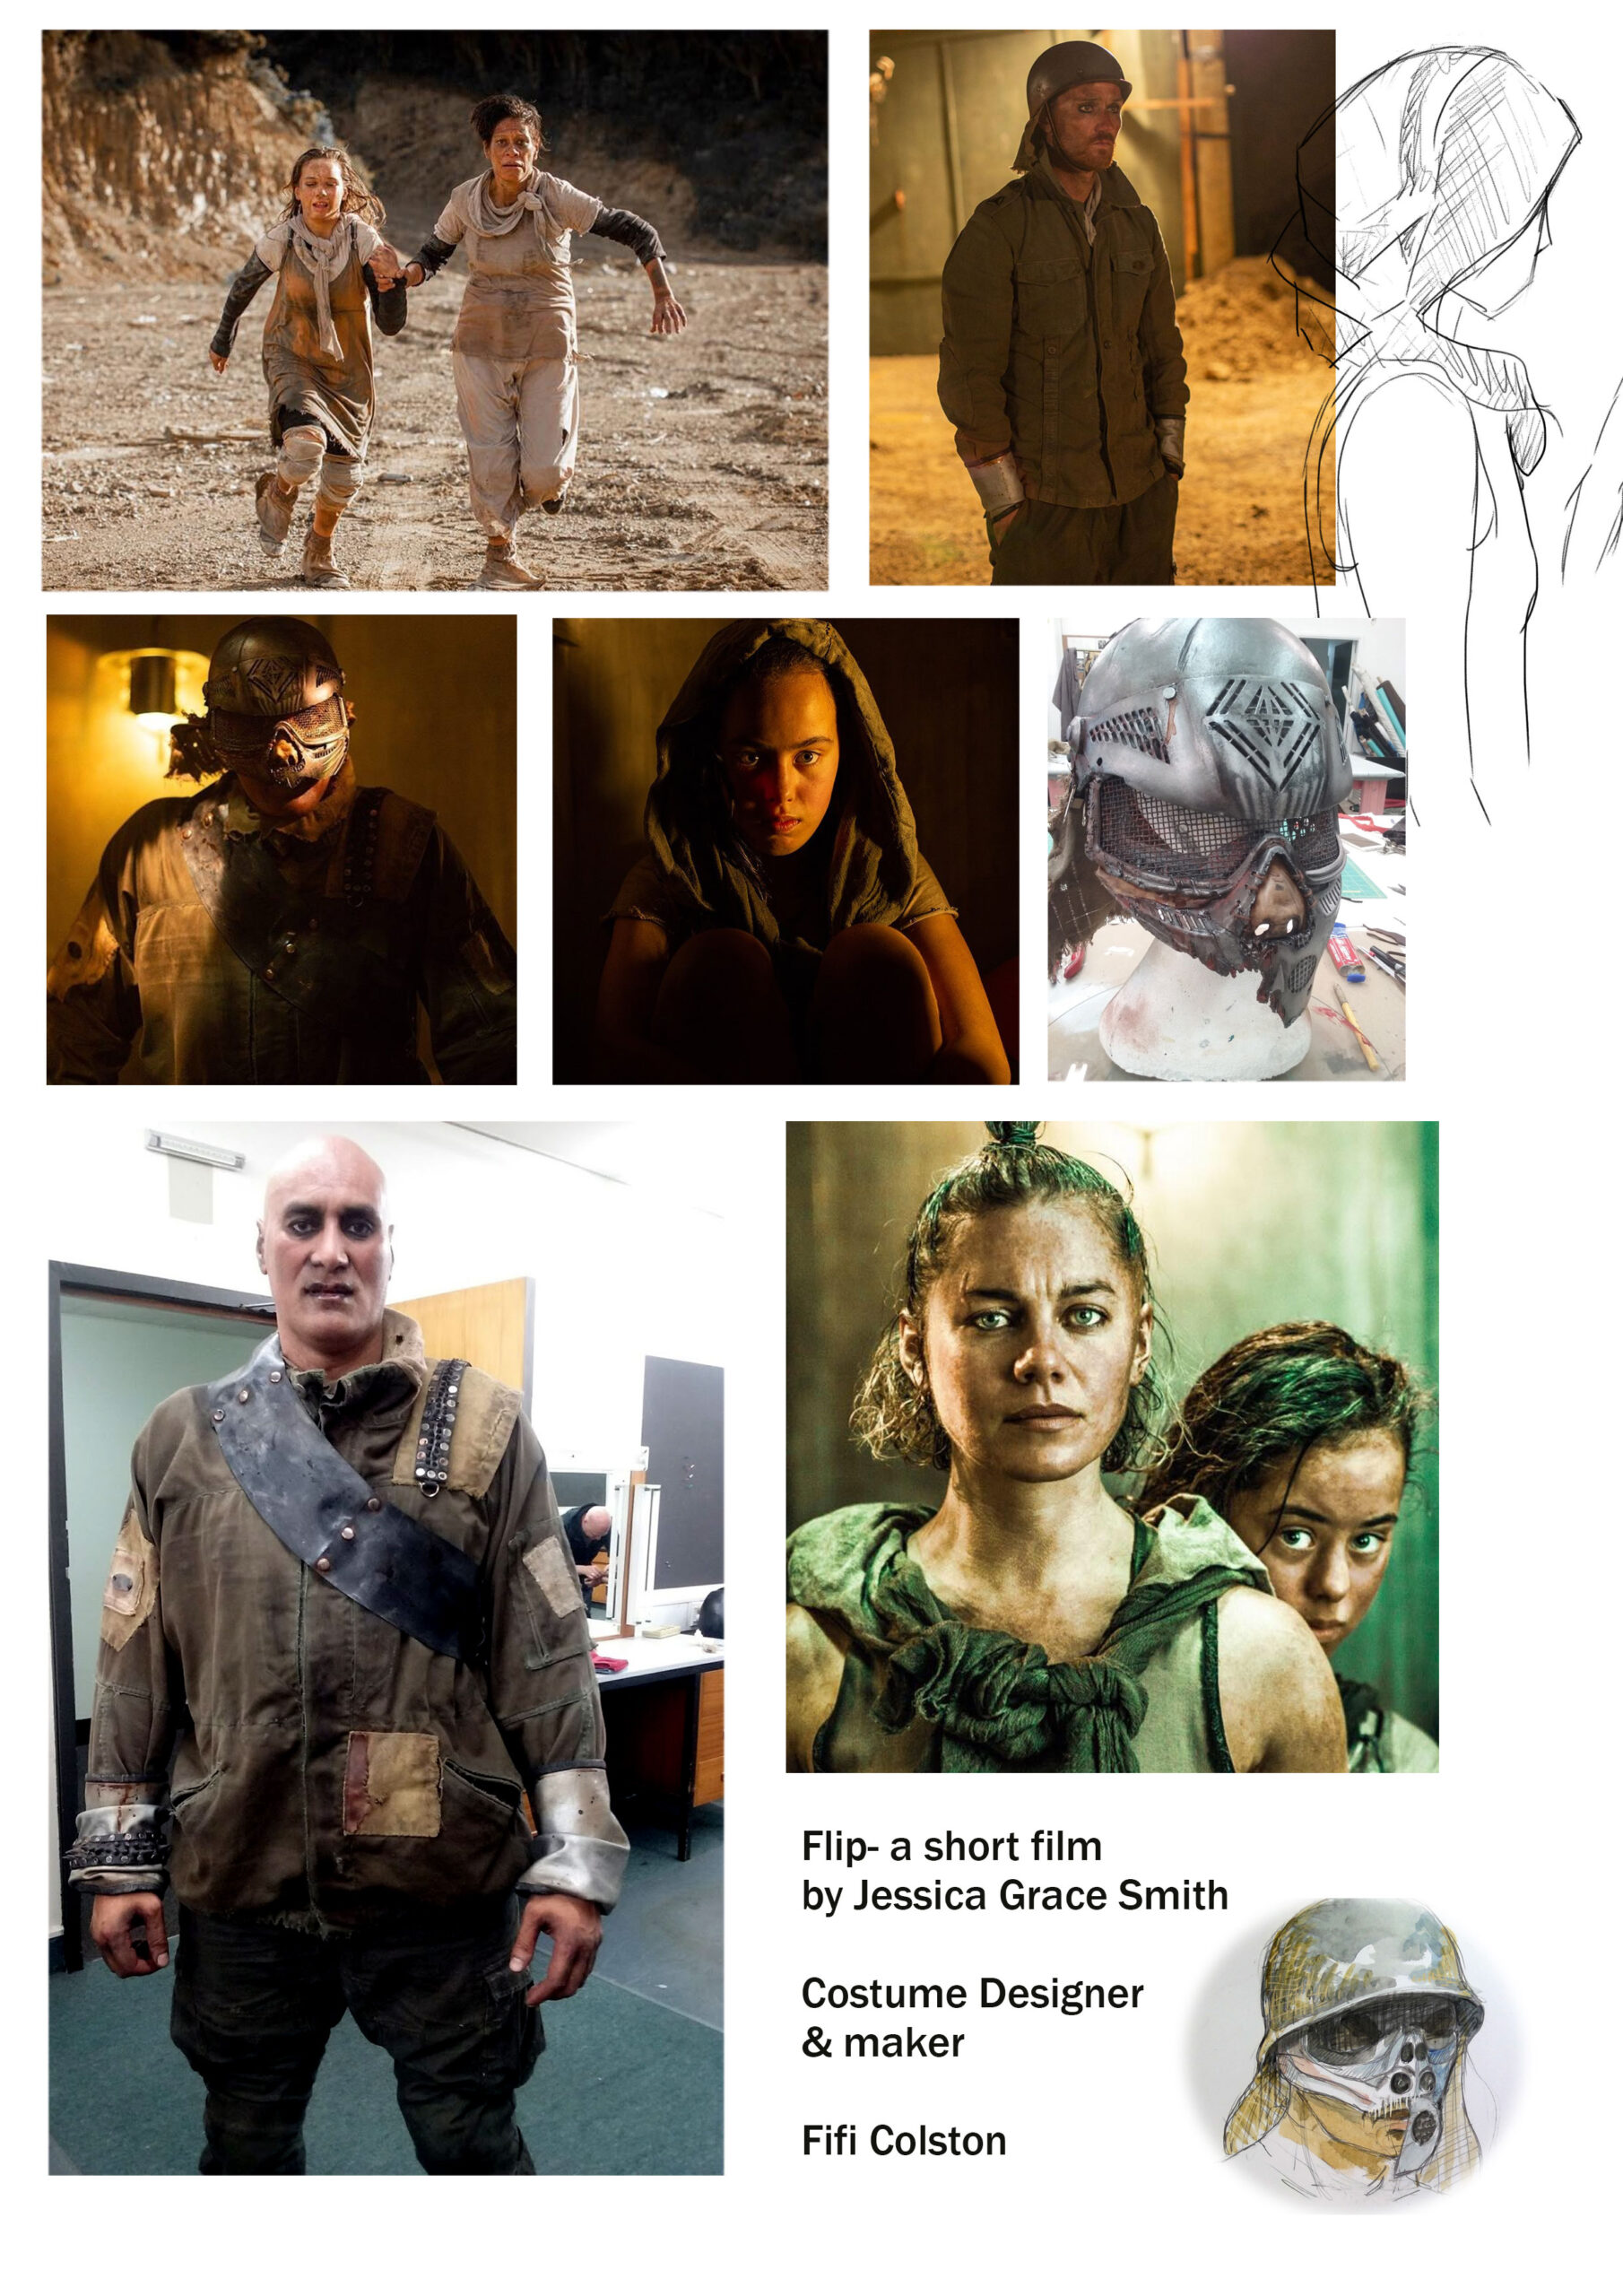 Flip-Tear-Sheet: Collage of images from Flip, a short film, featuring various costumes made by Fifi.